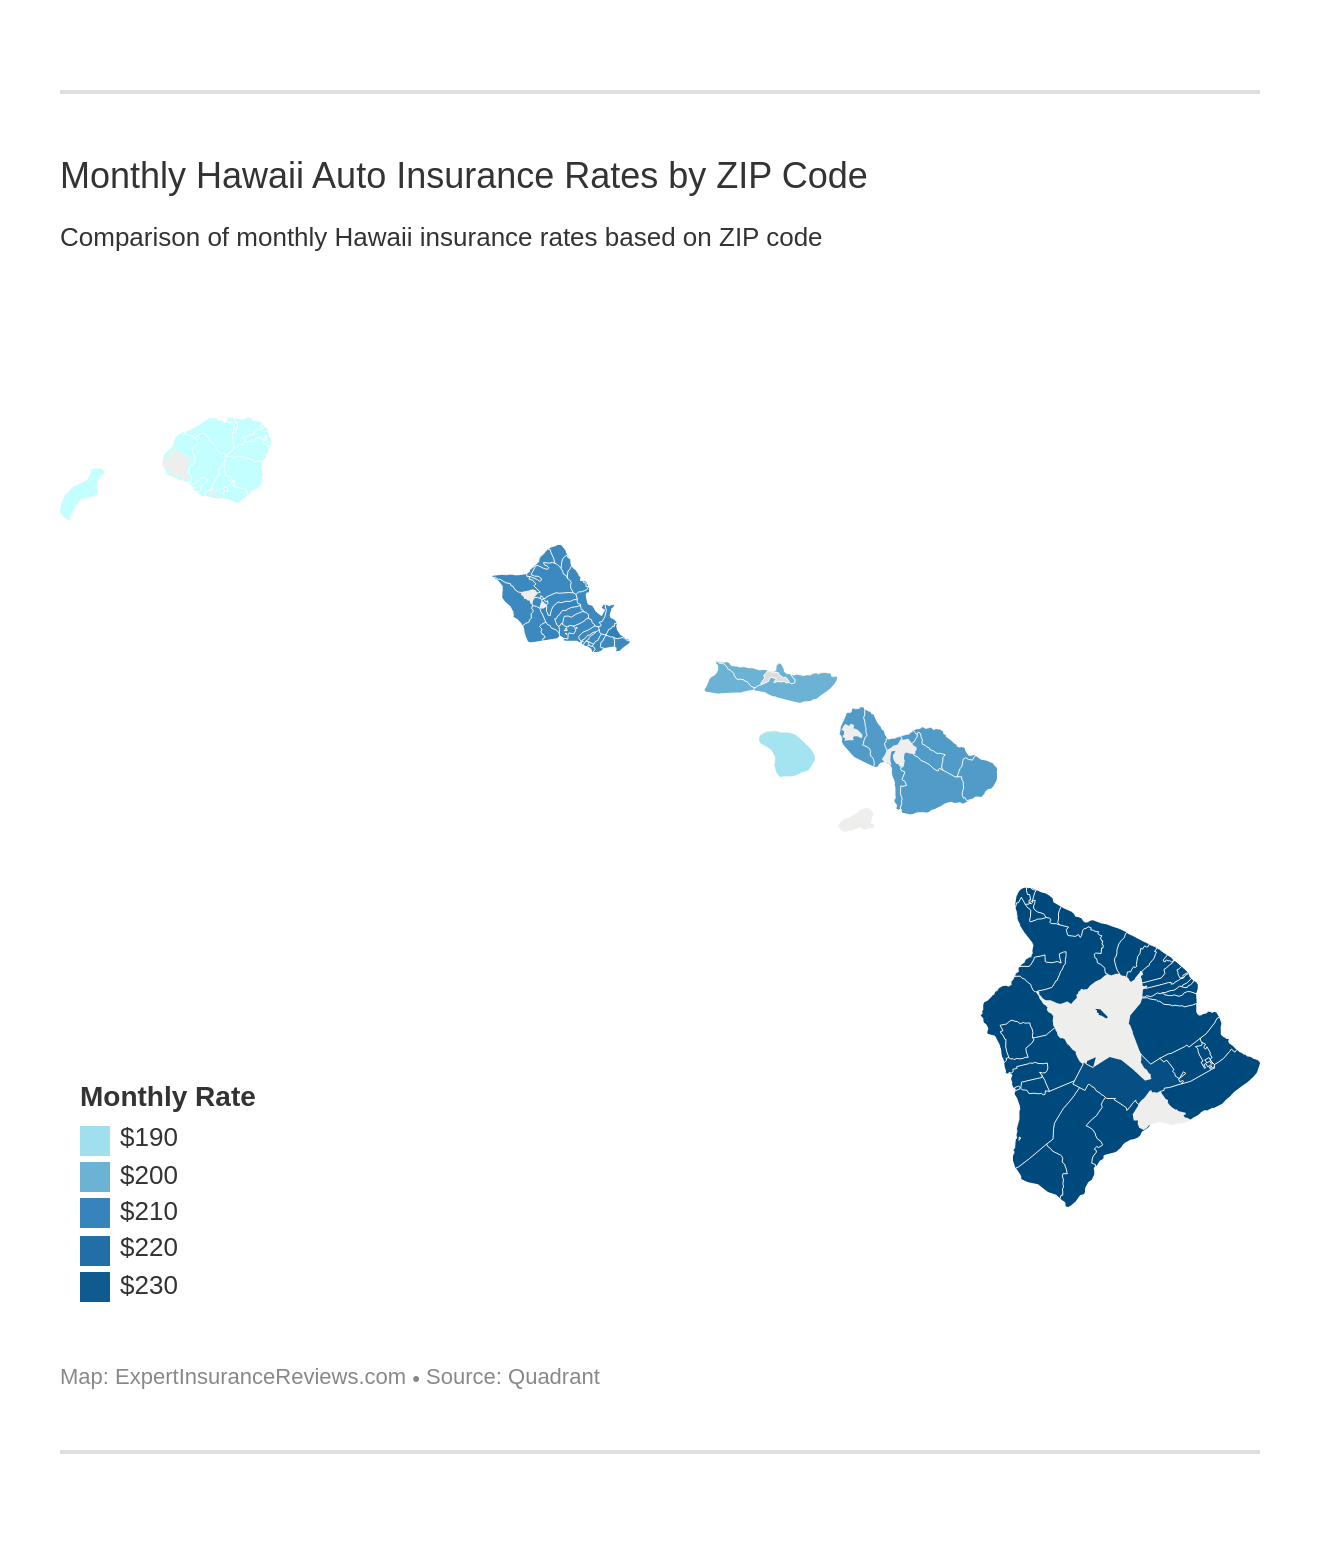 Monthly Hawaii Auto Insurance Rates by ZIP Code